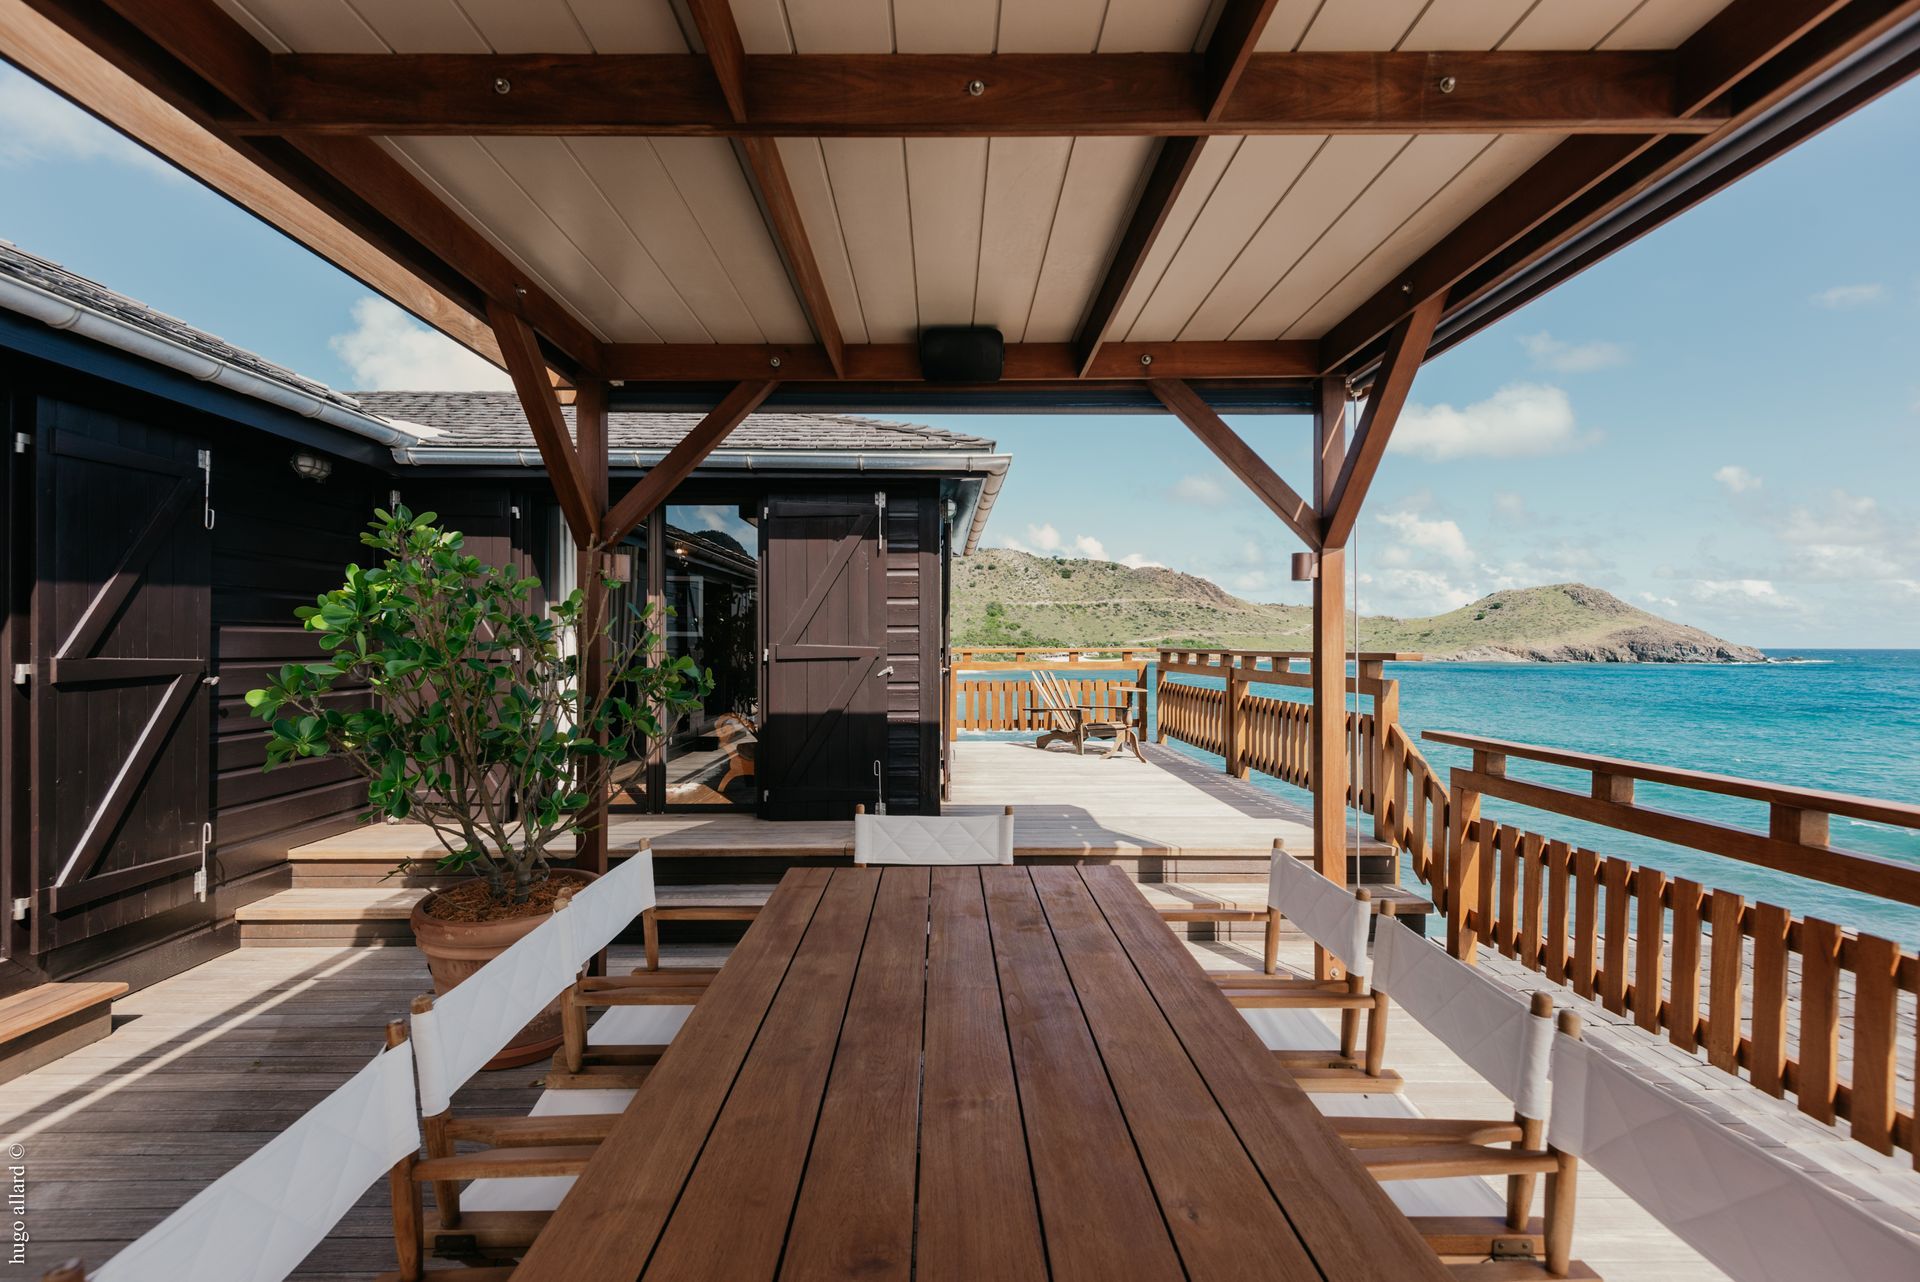 a wooden table and chairs under a canopy overlooking the ocean